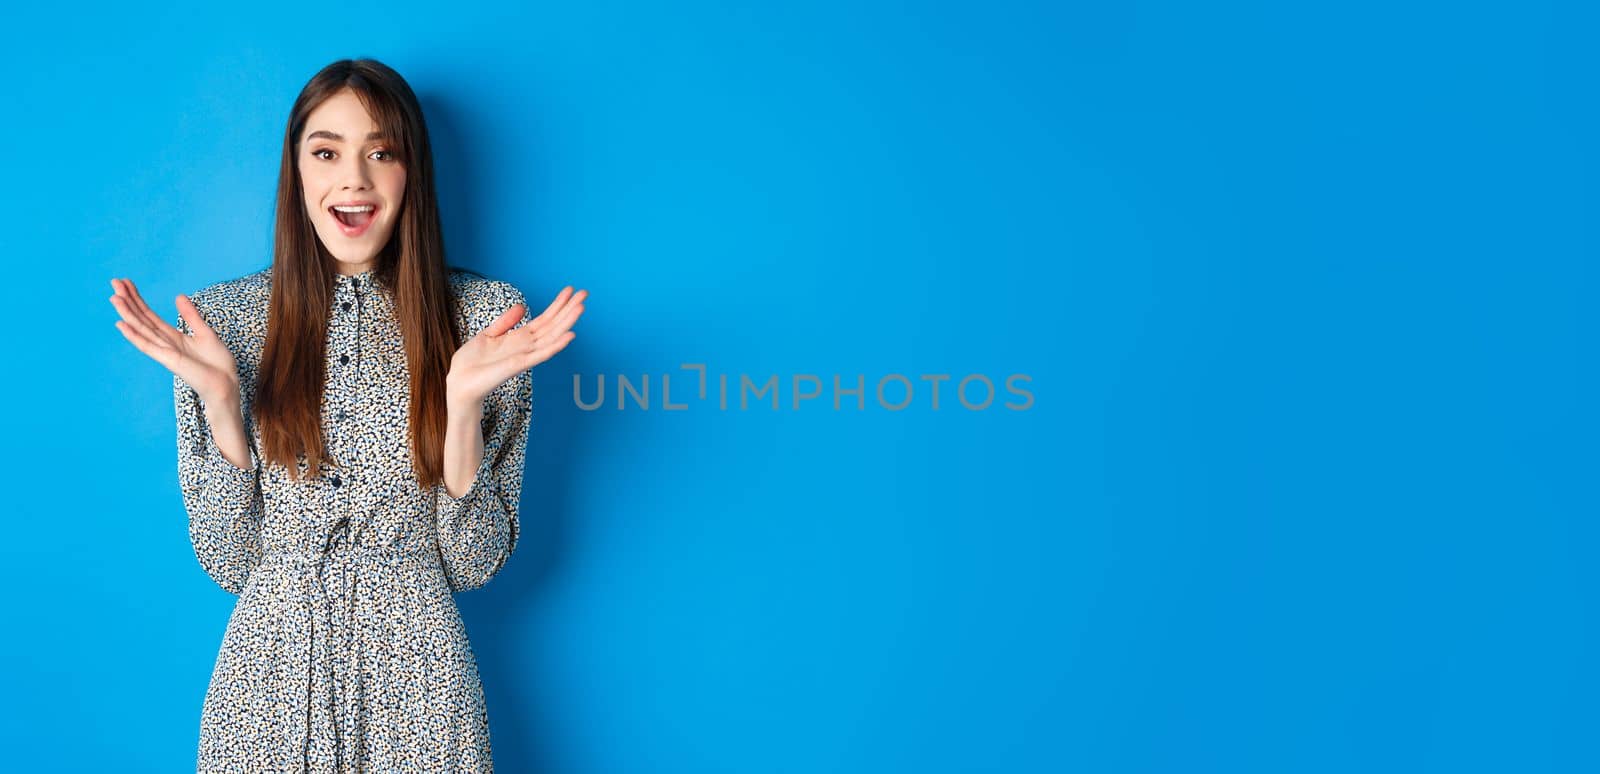 Excited beautiful woman clap hands and congratulate you, praising nice work, applause at camera and smiling, standing on blue background.